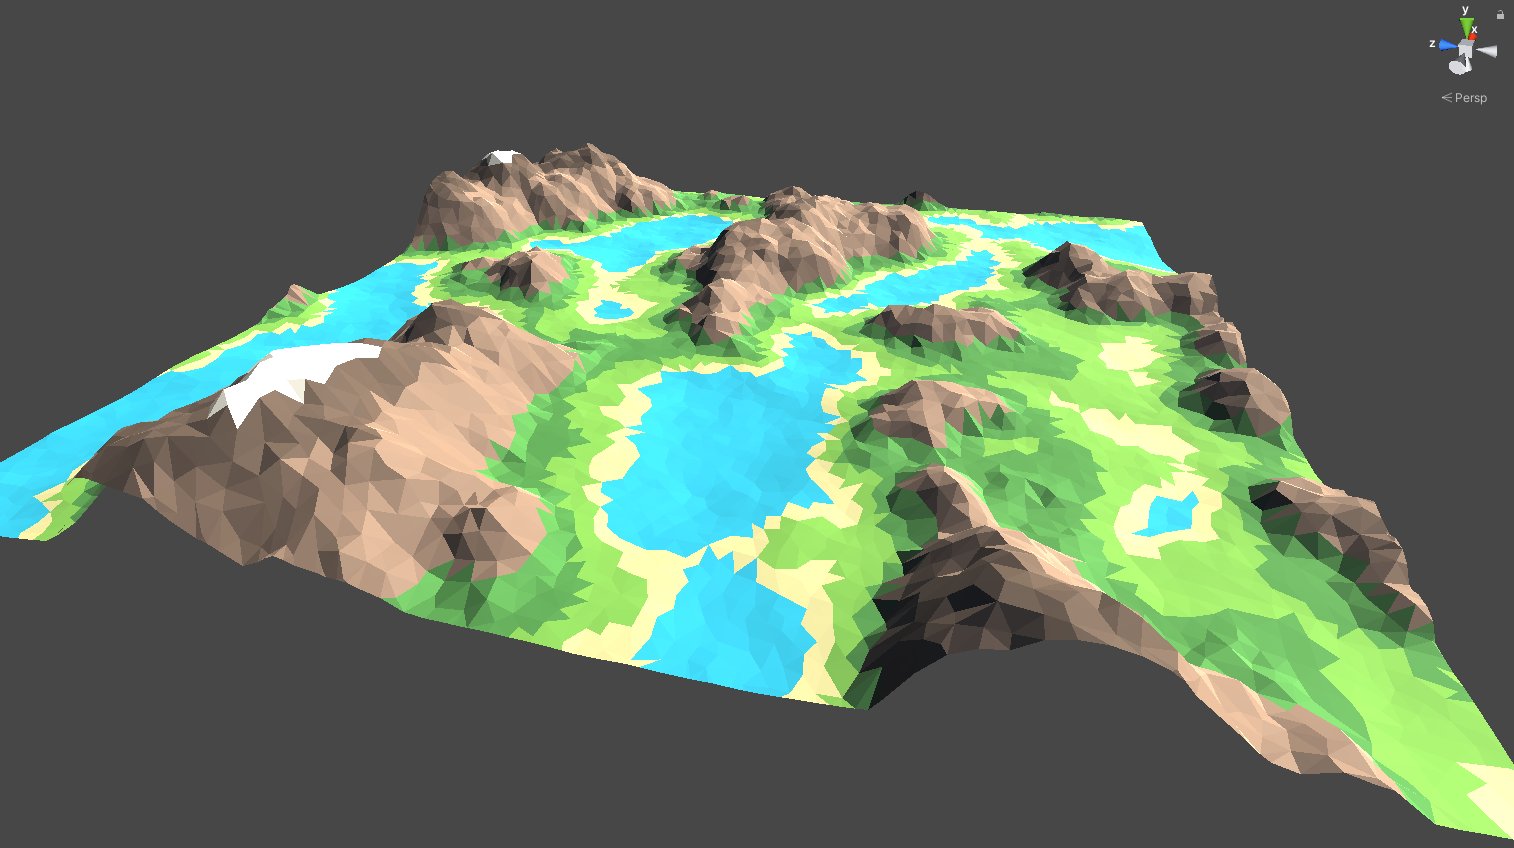 talent Perversion Peephole Kristin Lague on Twitter: "Here is a sneak peek of the finished low-poly  procedural terrain creator I am currently making in @unity3d. Going to  start recording the video next week. #madewithunity #gamedev